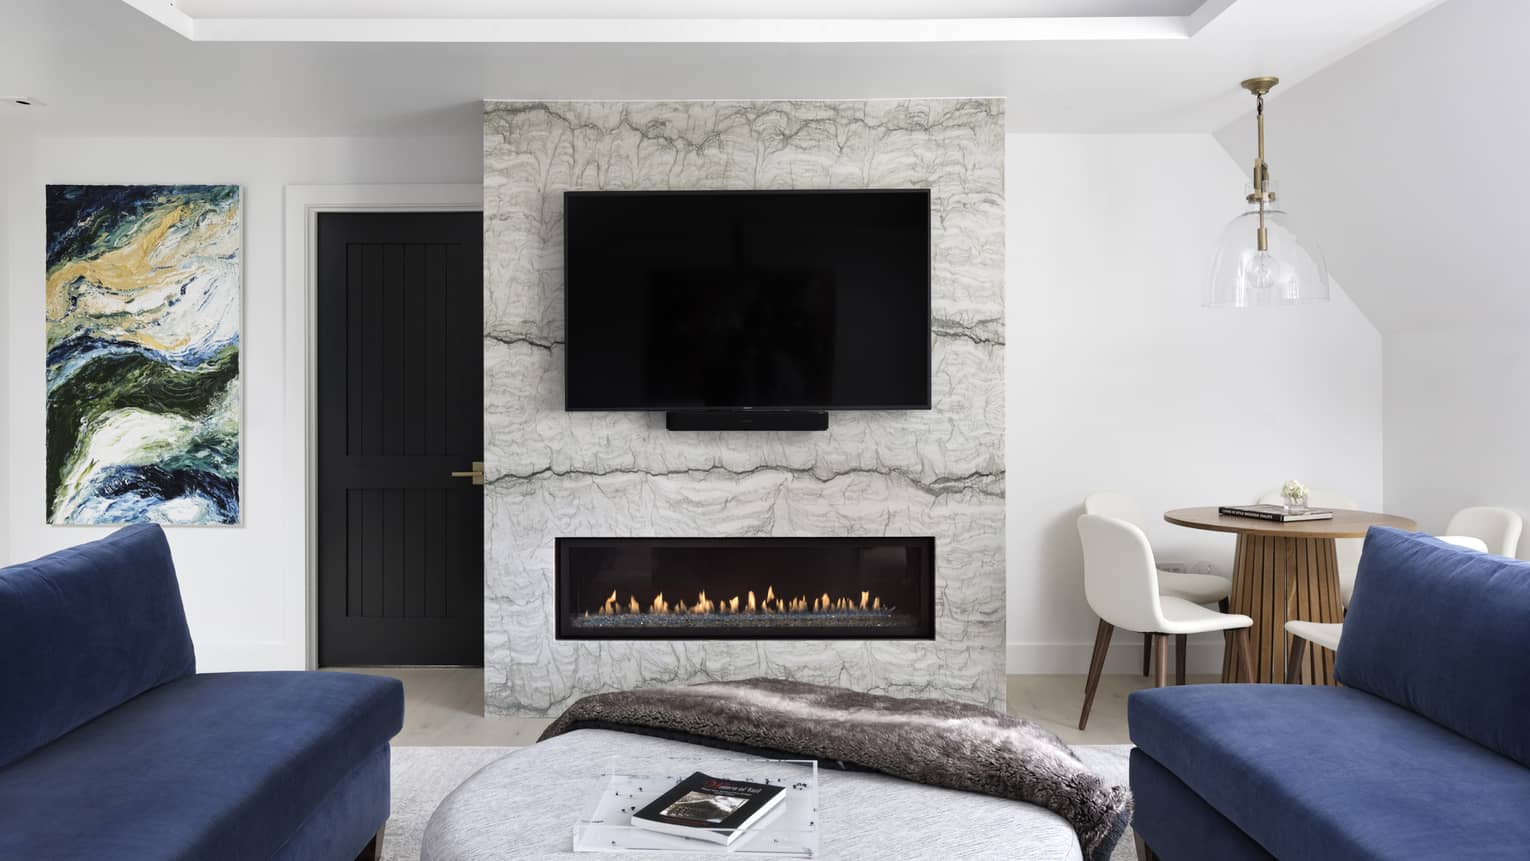 Modern fireplace with marble hearth, flat-screen TV, two dark blue sofas